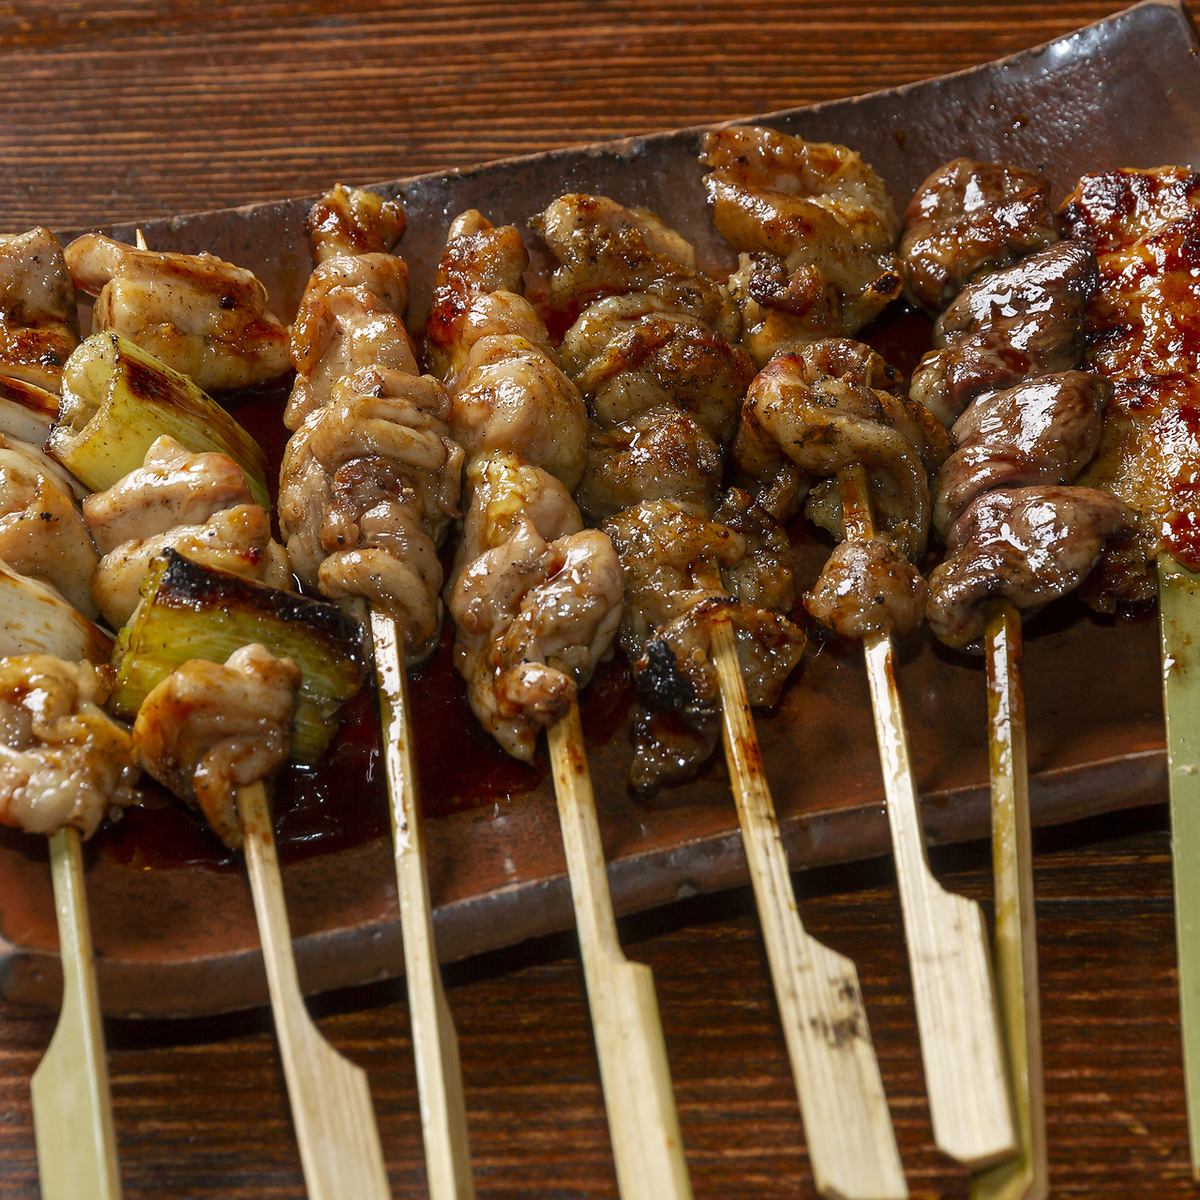 From preparation to the best preparation and hospitality...a Yakitori revolution♪